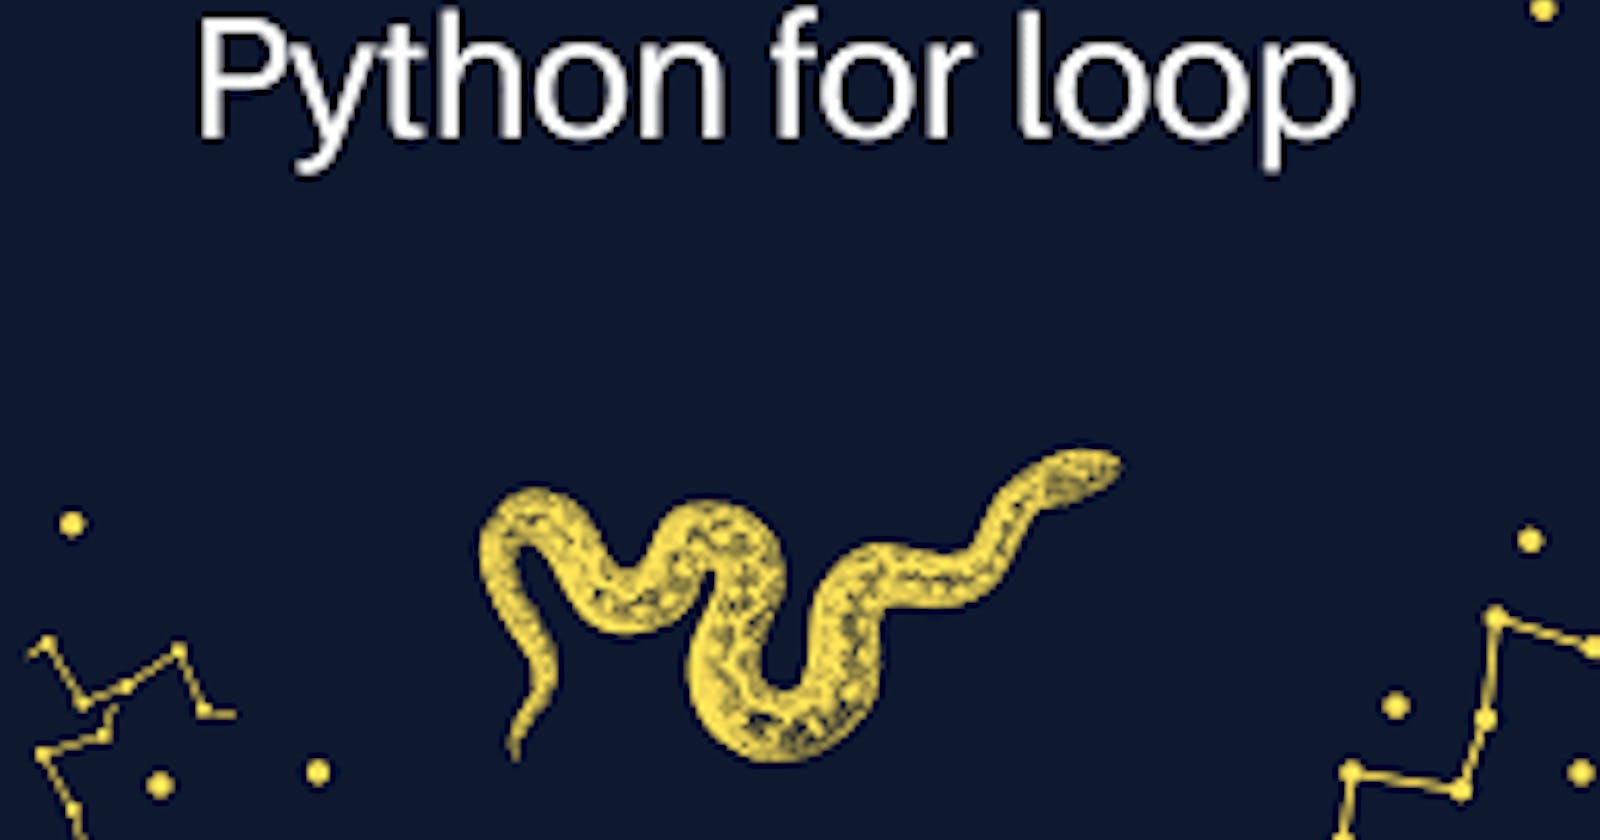 Python Loops Explained